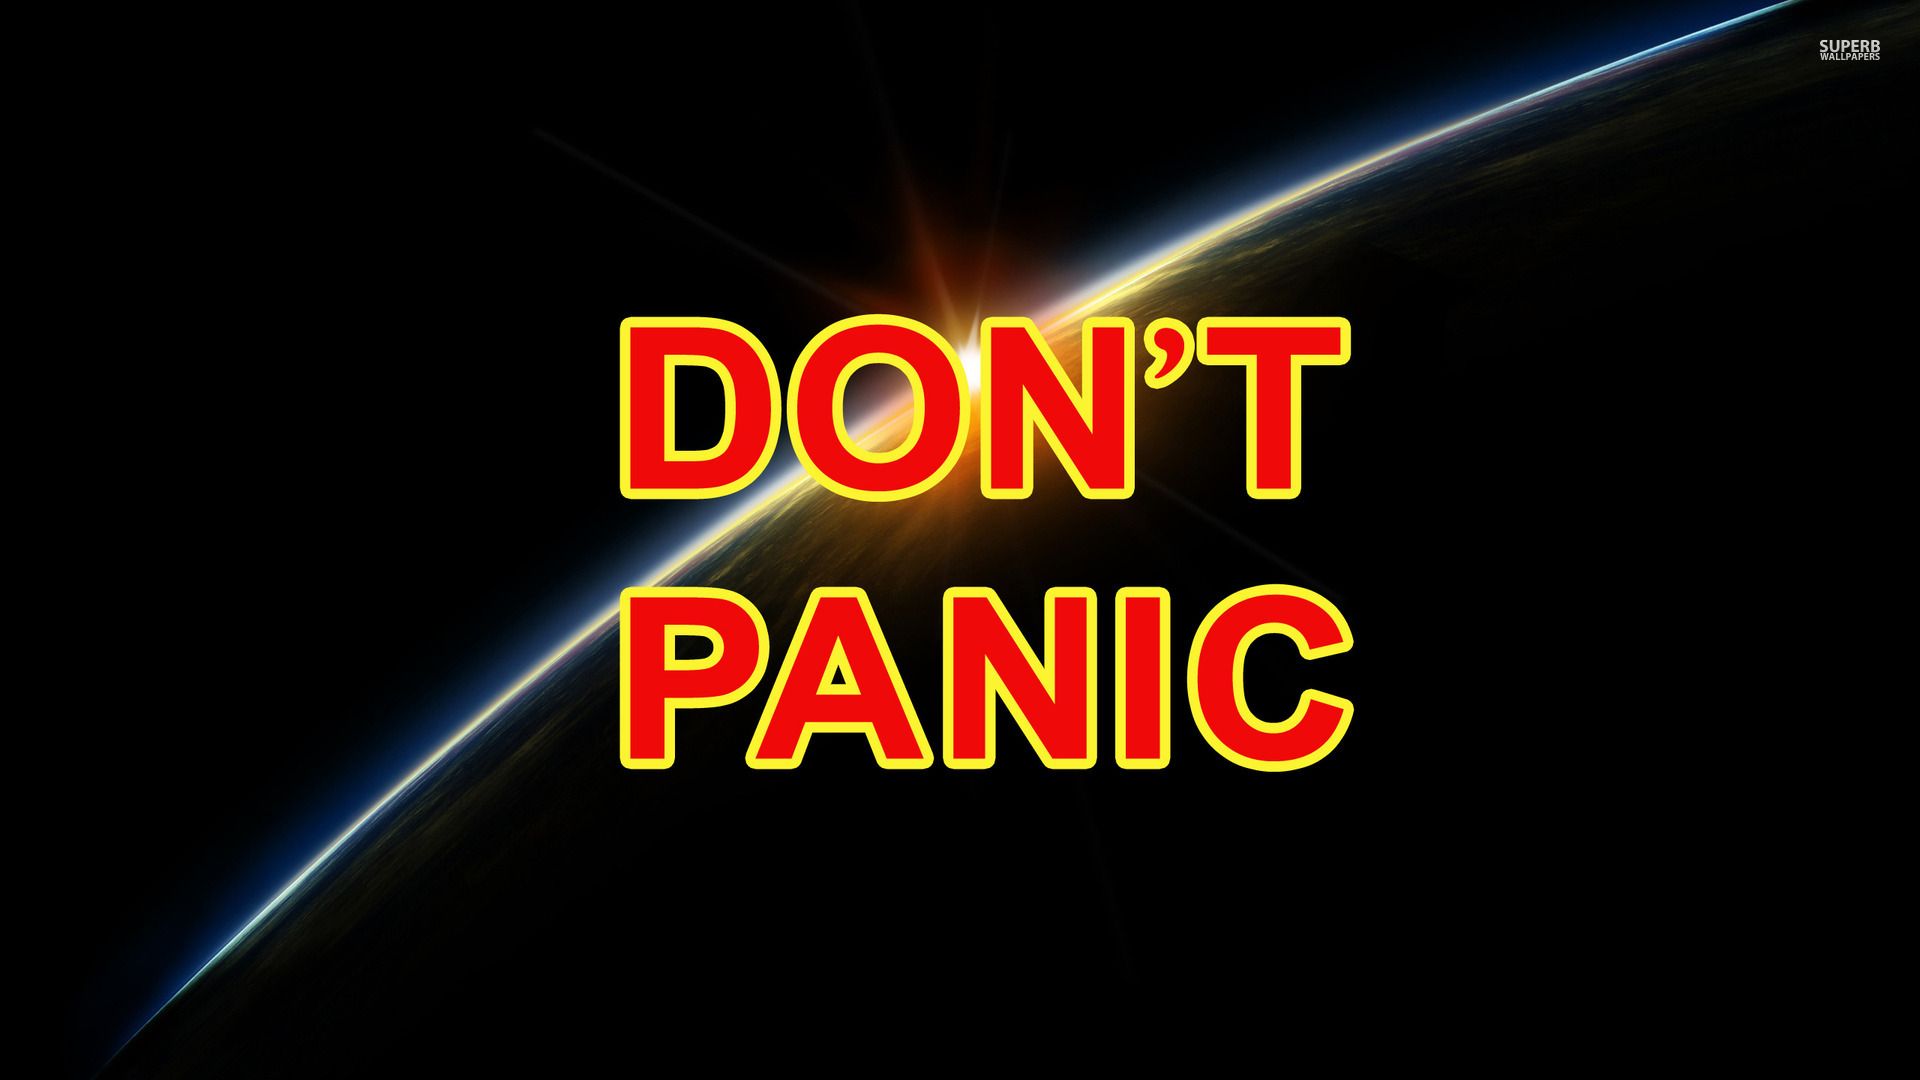 Don't panic wallpaper - Typography wallpapers - #43717